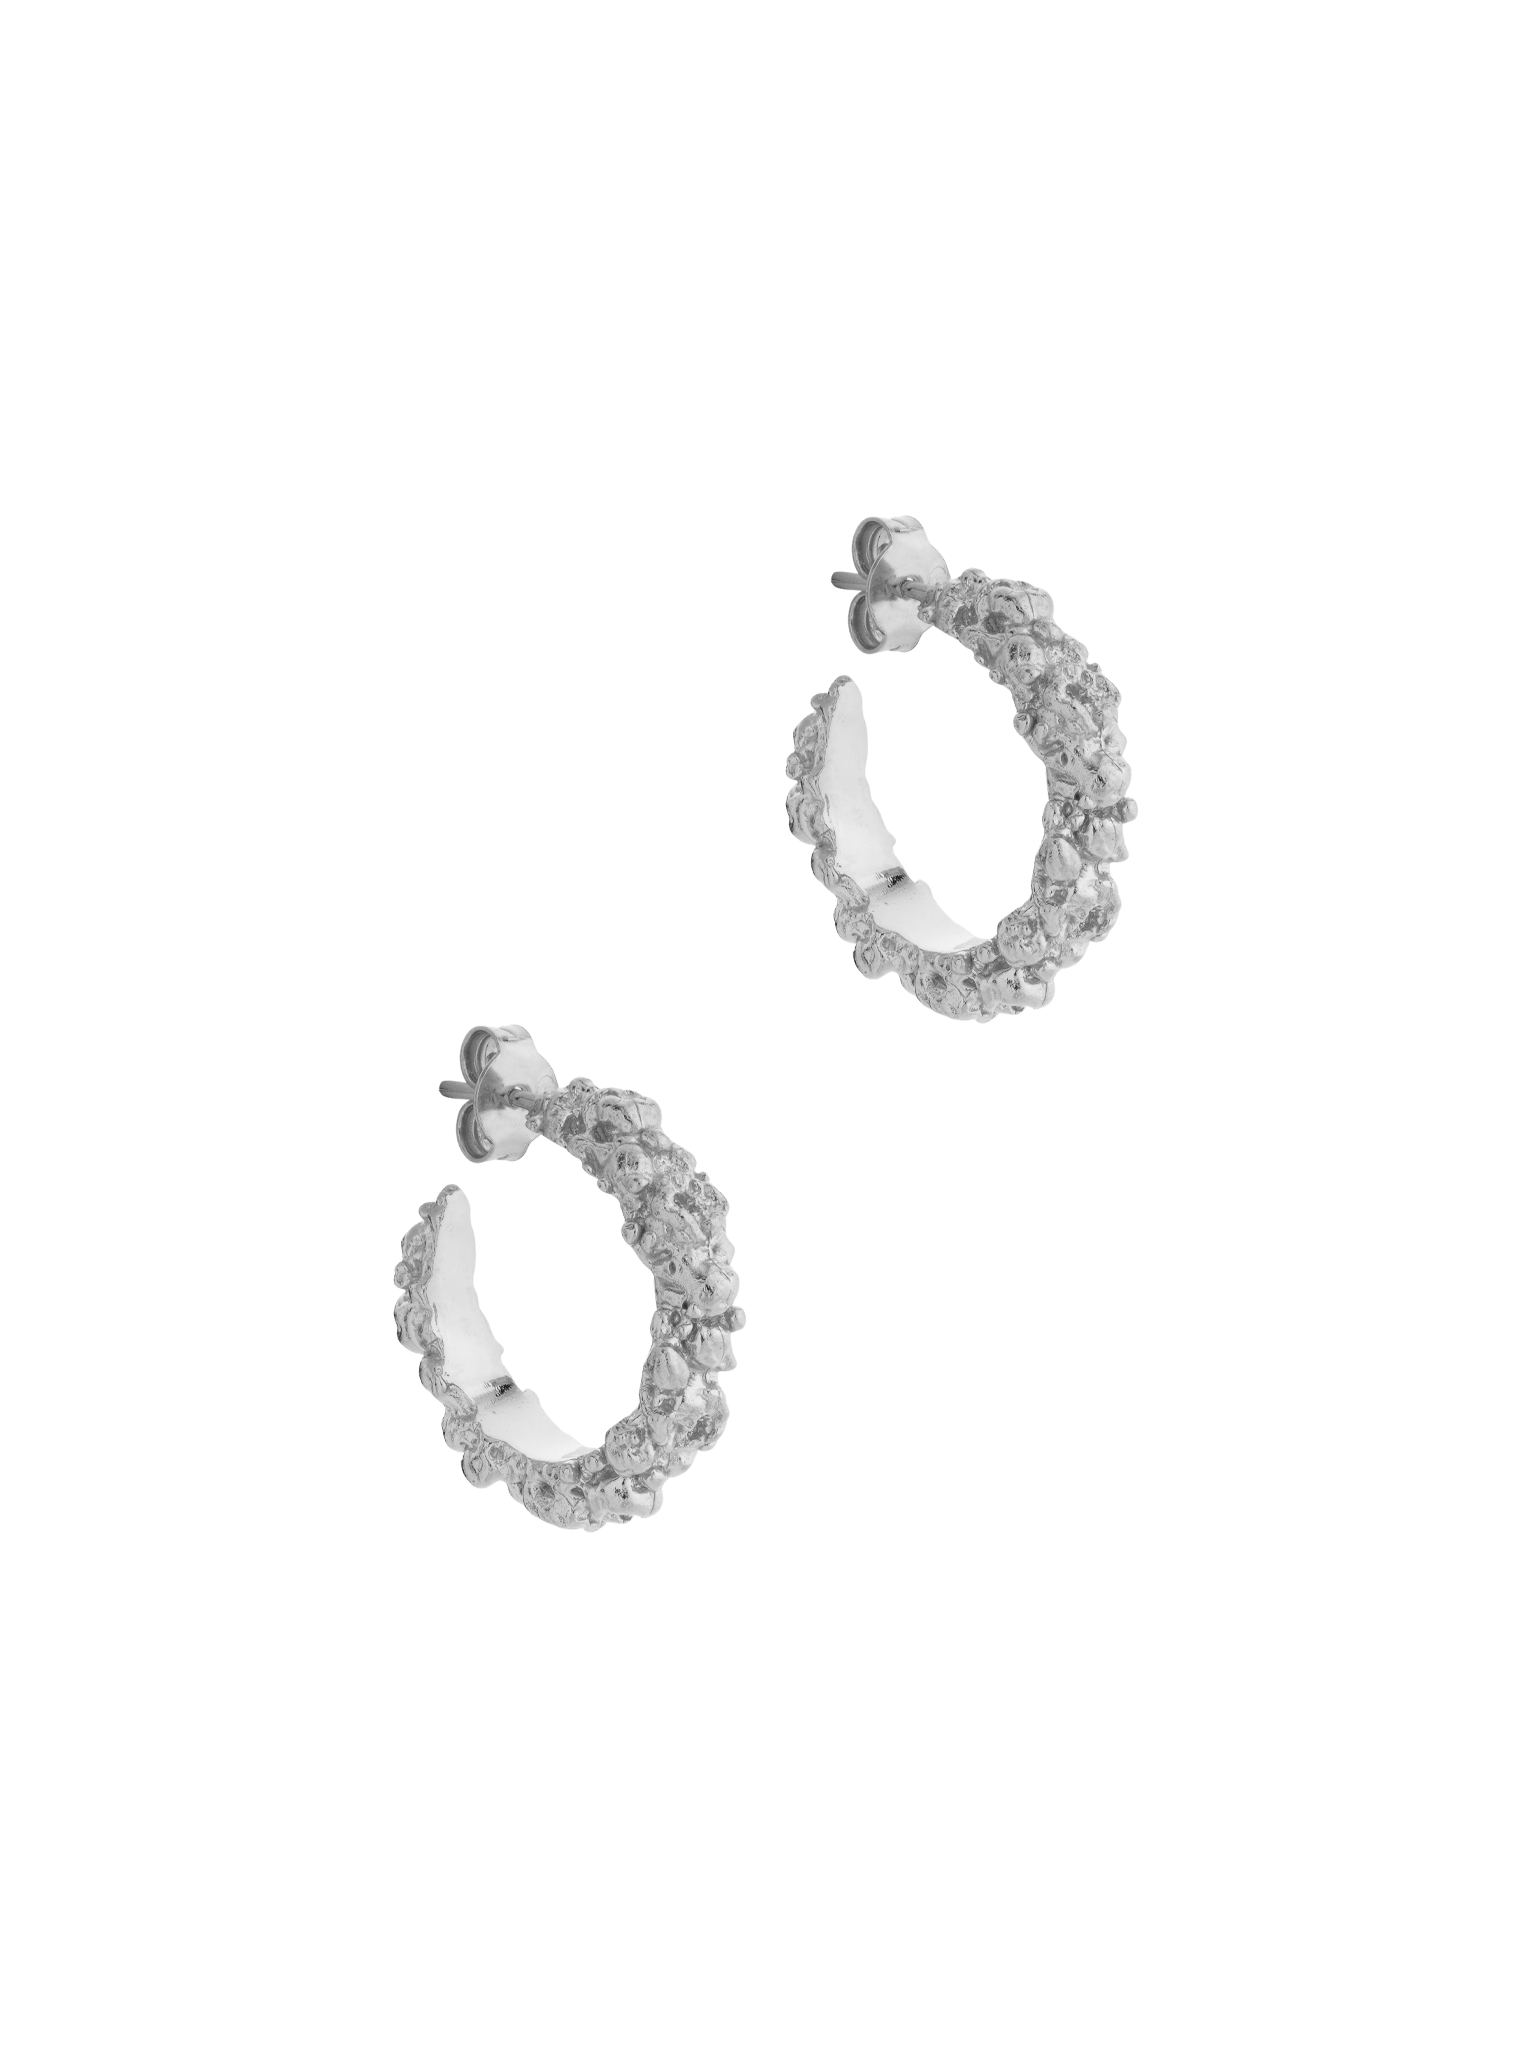 A pair of The Garden Hoops in Sterling silver by Cremilde Bispo Jewellery, with hand-carved nature inspired motifs.